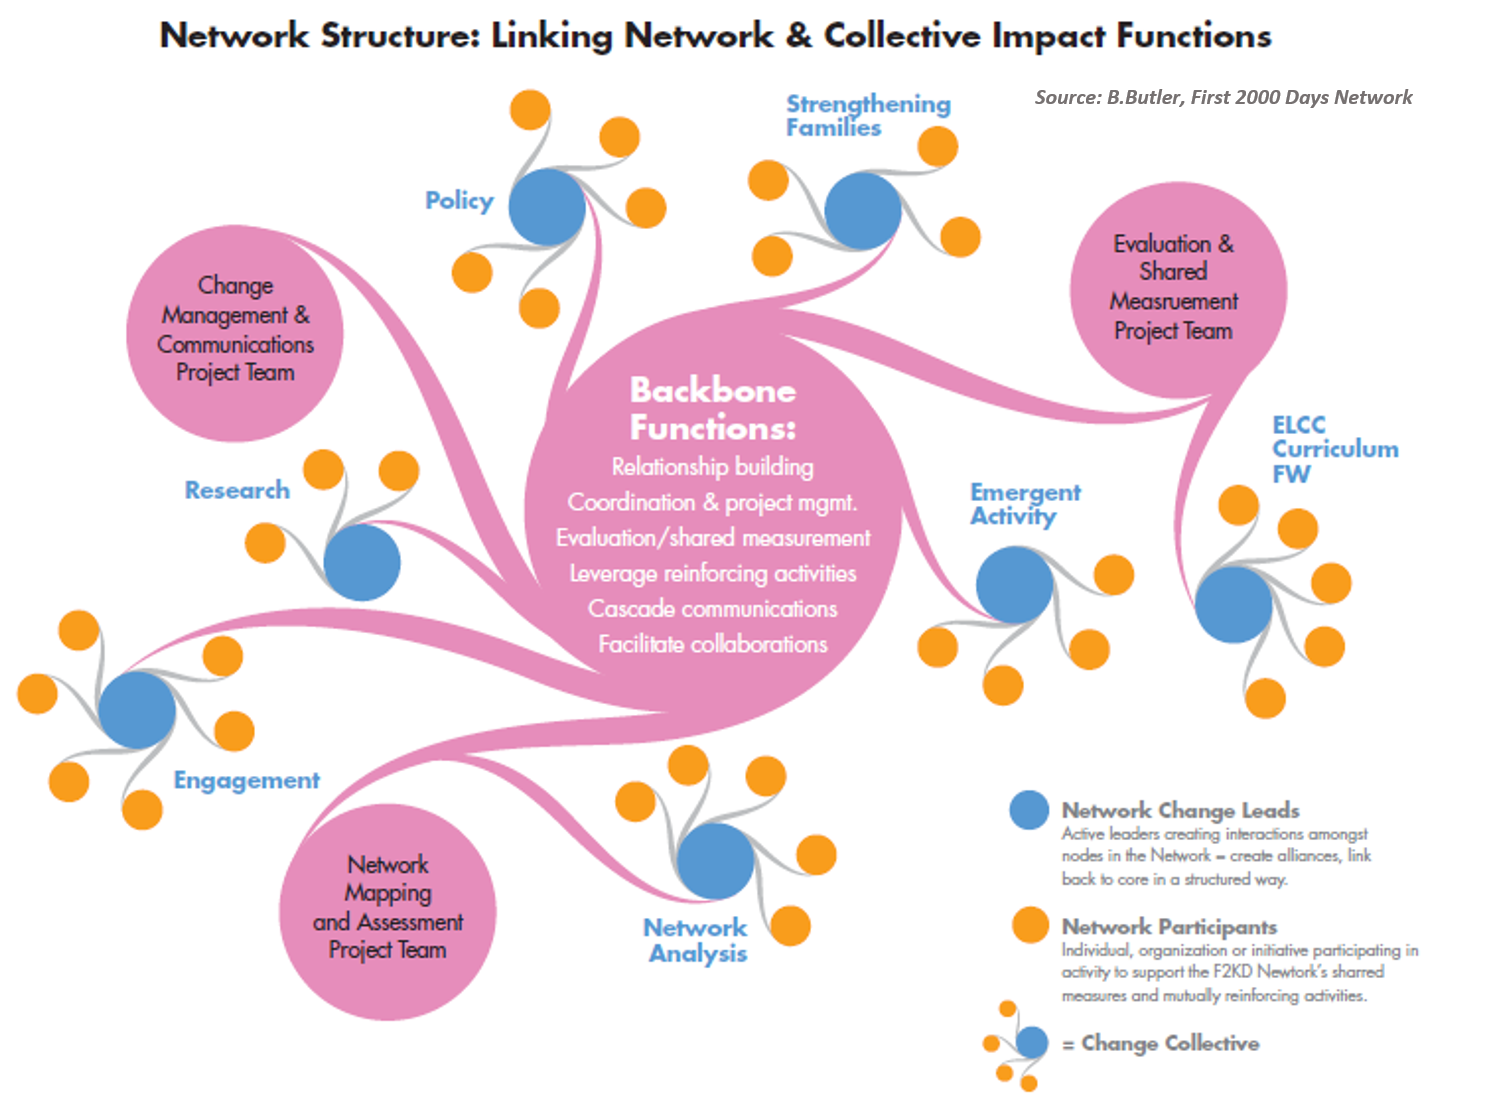 Featured image for “Network Governance as an Empowerment Tool”